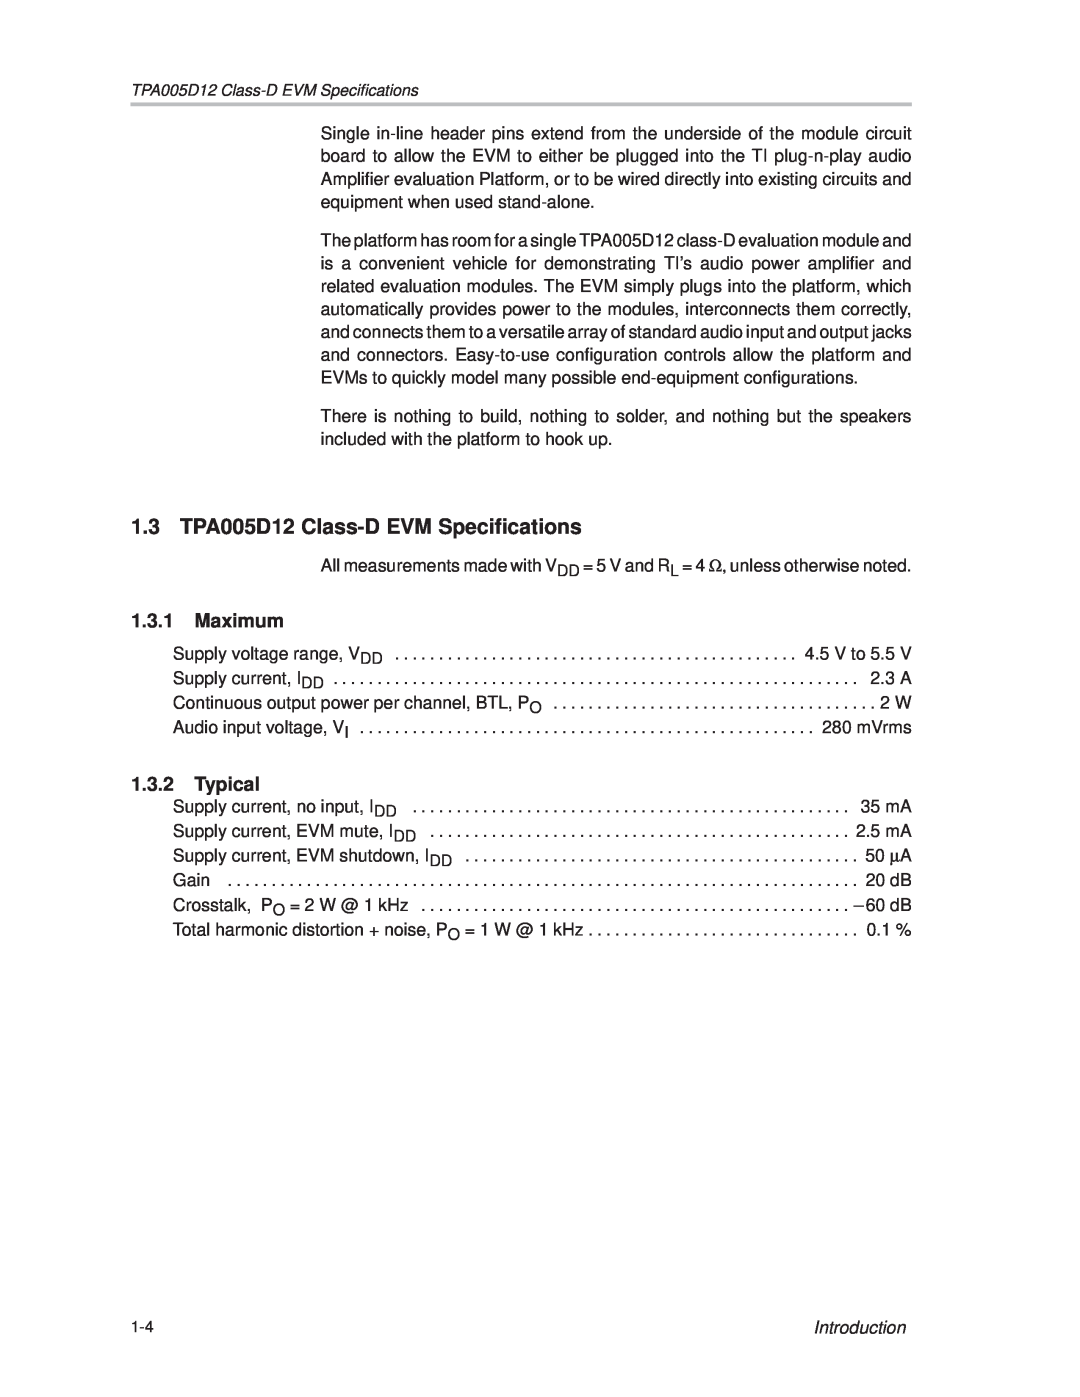 Texas Instruments manual 1.3 TPA005D12 Class-DEVM Specifications, 1.3.1Maximum, Typical, Introduction 